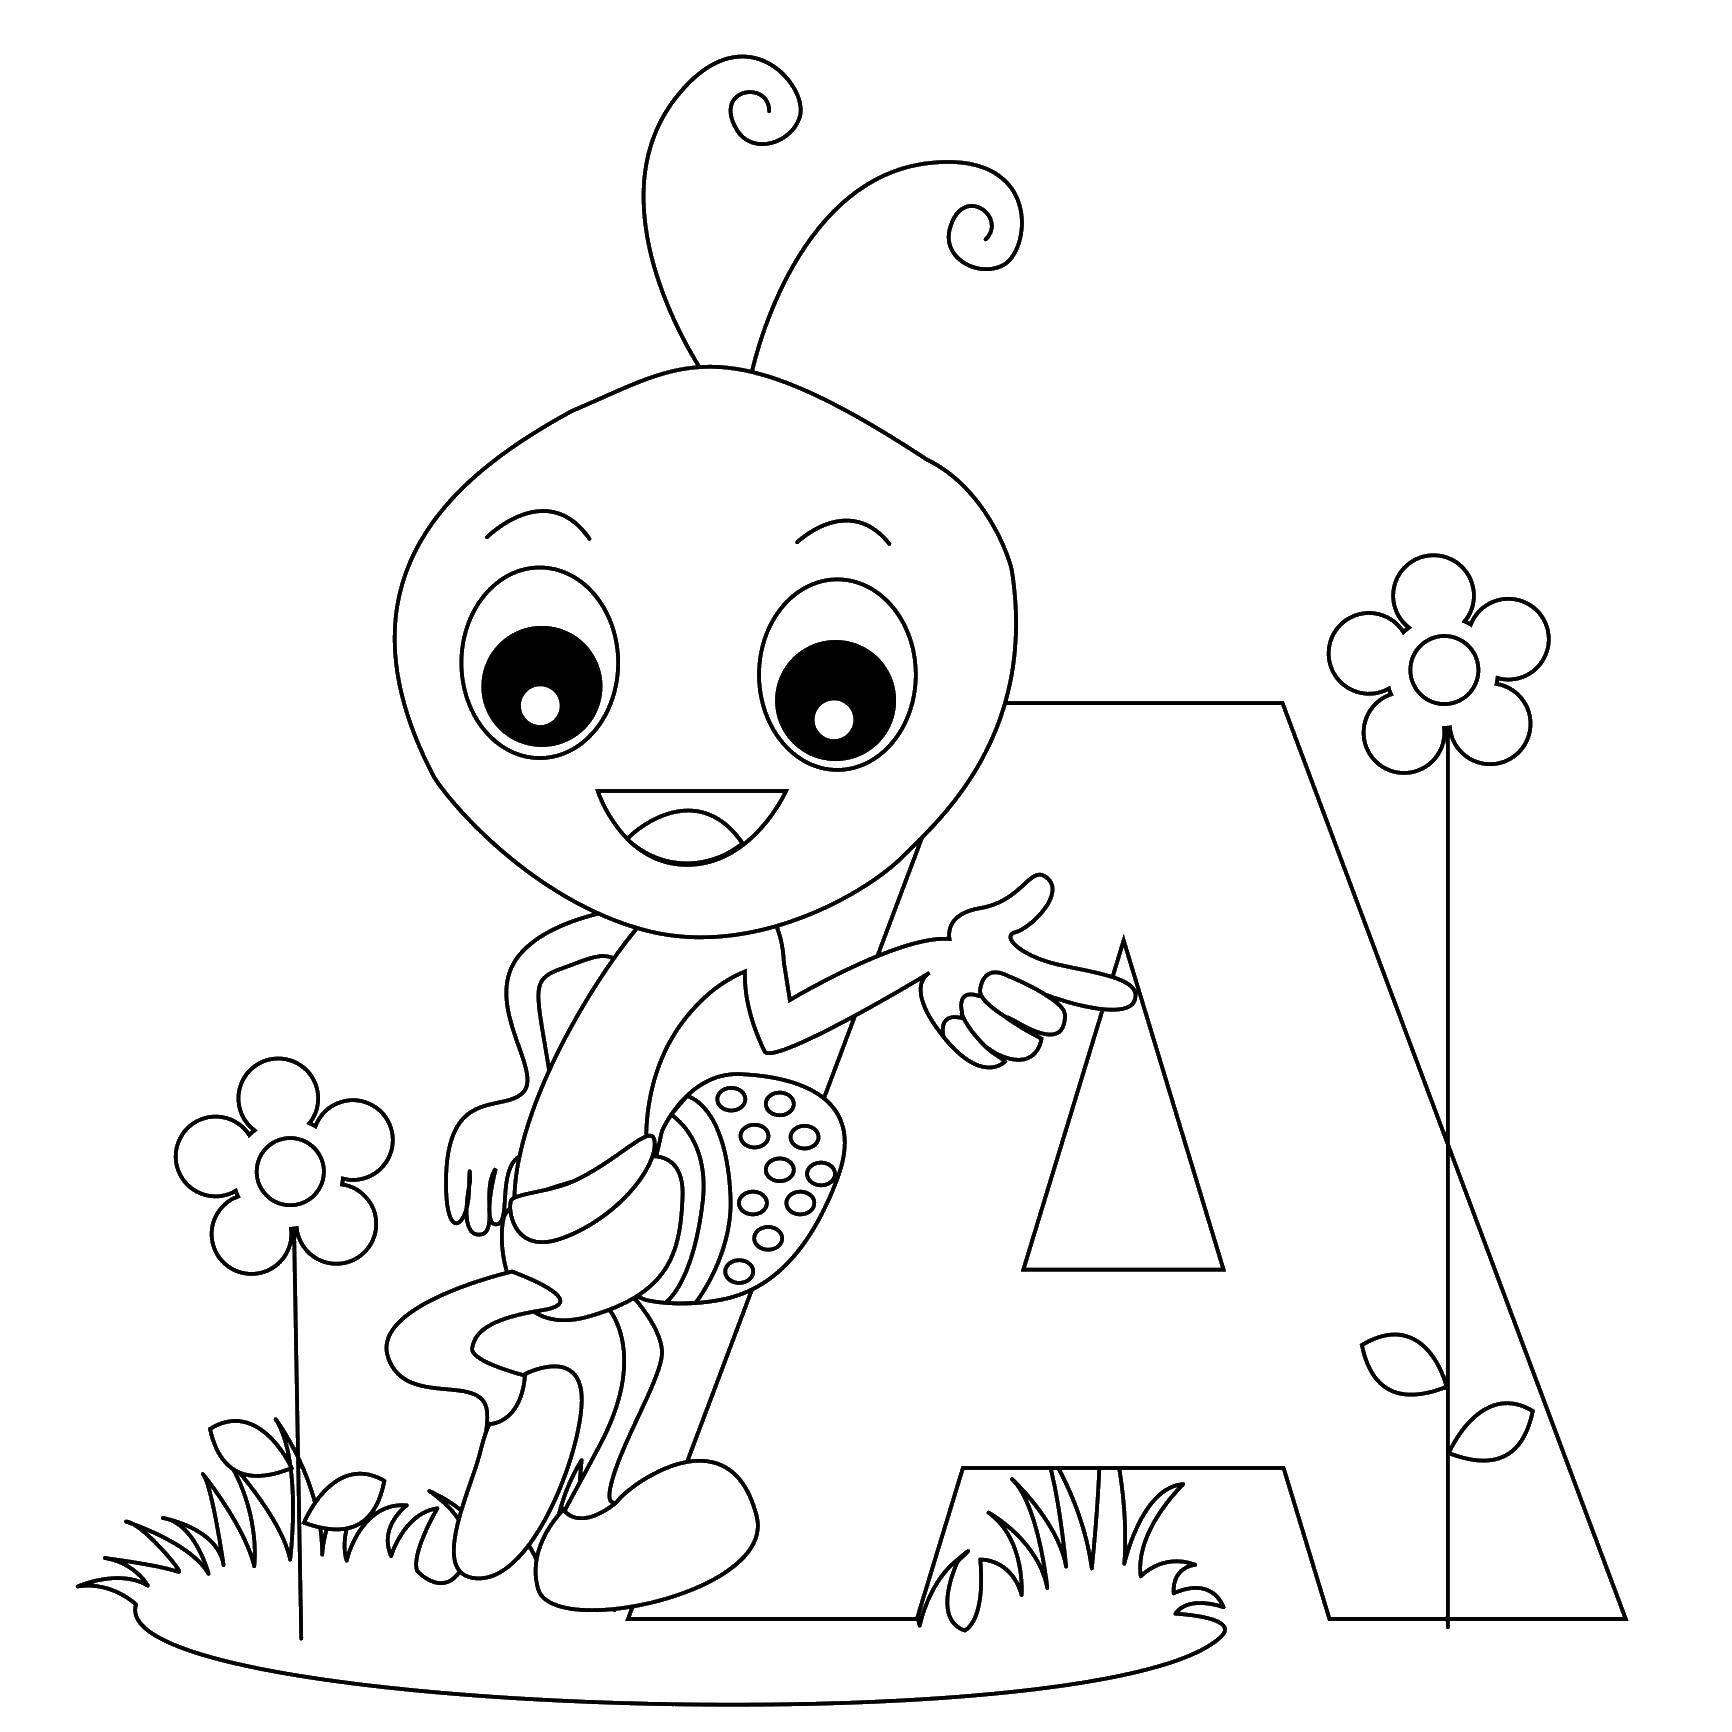 Coloring Alphabet, letters. Category the alphabet. Tags:  The alphabet, letters, words.